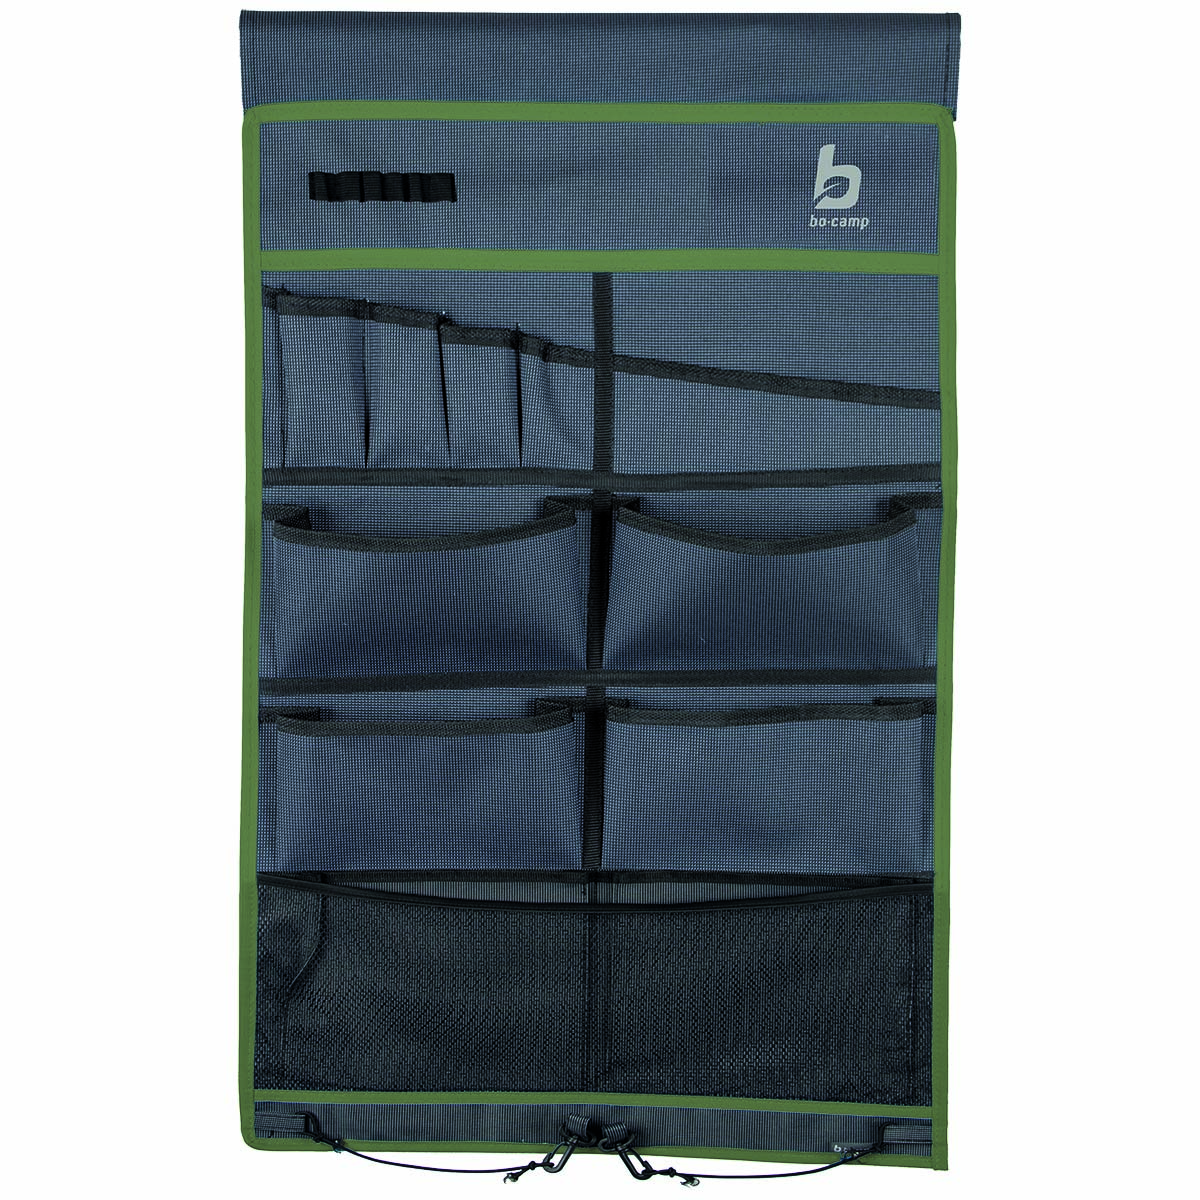 1771503 A popular multifunctional 12-compartment organiser Has 6 large compartments, 1 medium compartment including a net and 4 small compartments. Simple, and can be mounted in various ways. This pelmet can be hung on a caravan rail with the string, with velcro to the tent pole or with eyelets on hooks. The loops at the bottom provide additional fixation. Made from a high quality Two-Tone 600D Oxford Polyester.